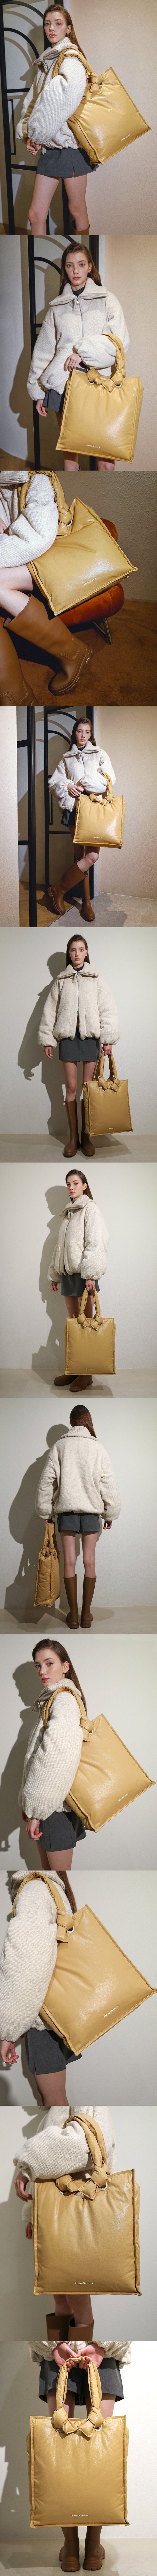 BELLY PUFFER TOTE BAG - BUTTER BEIGE